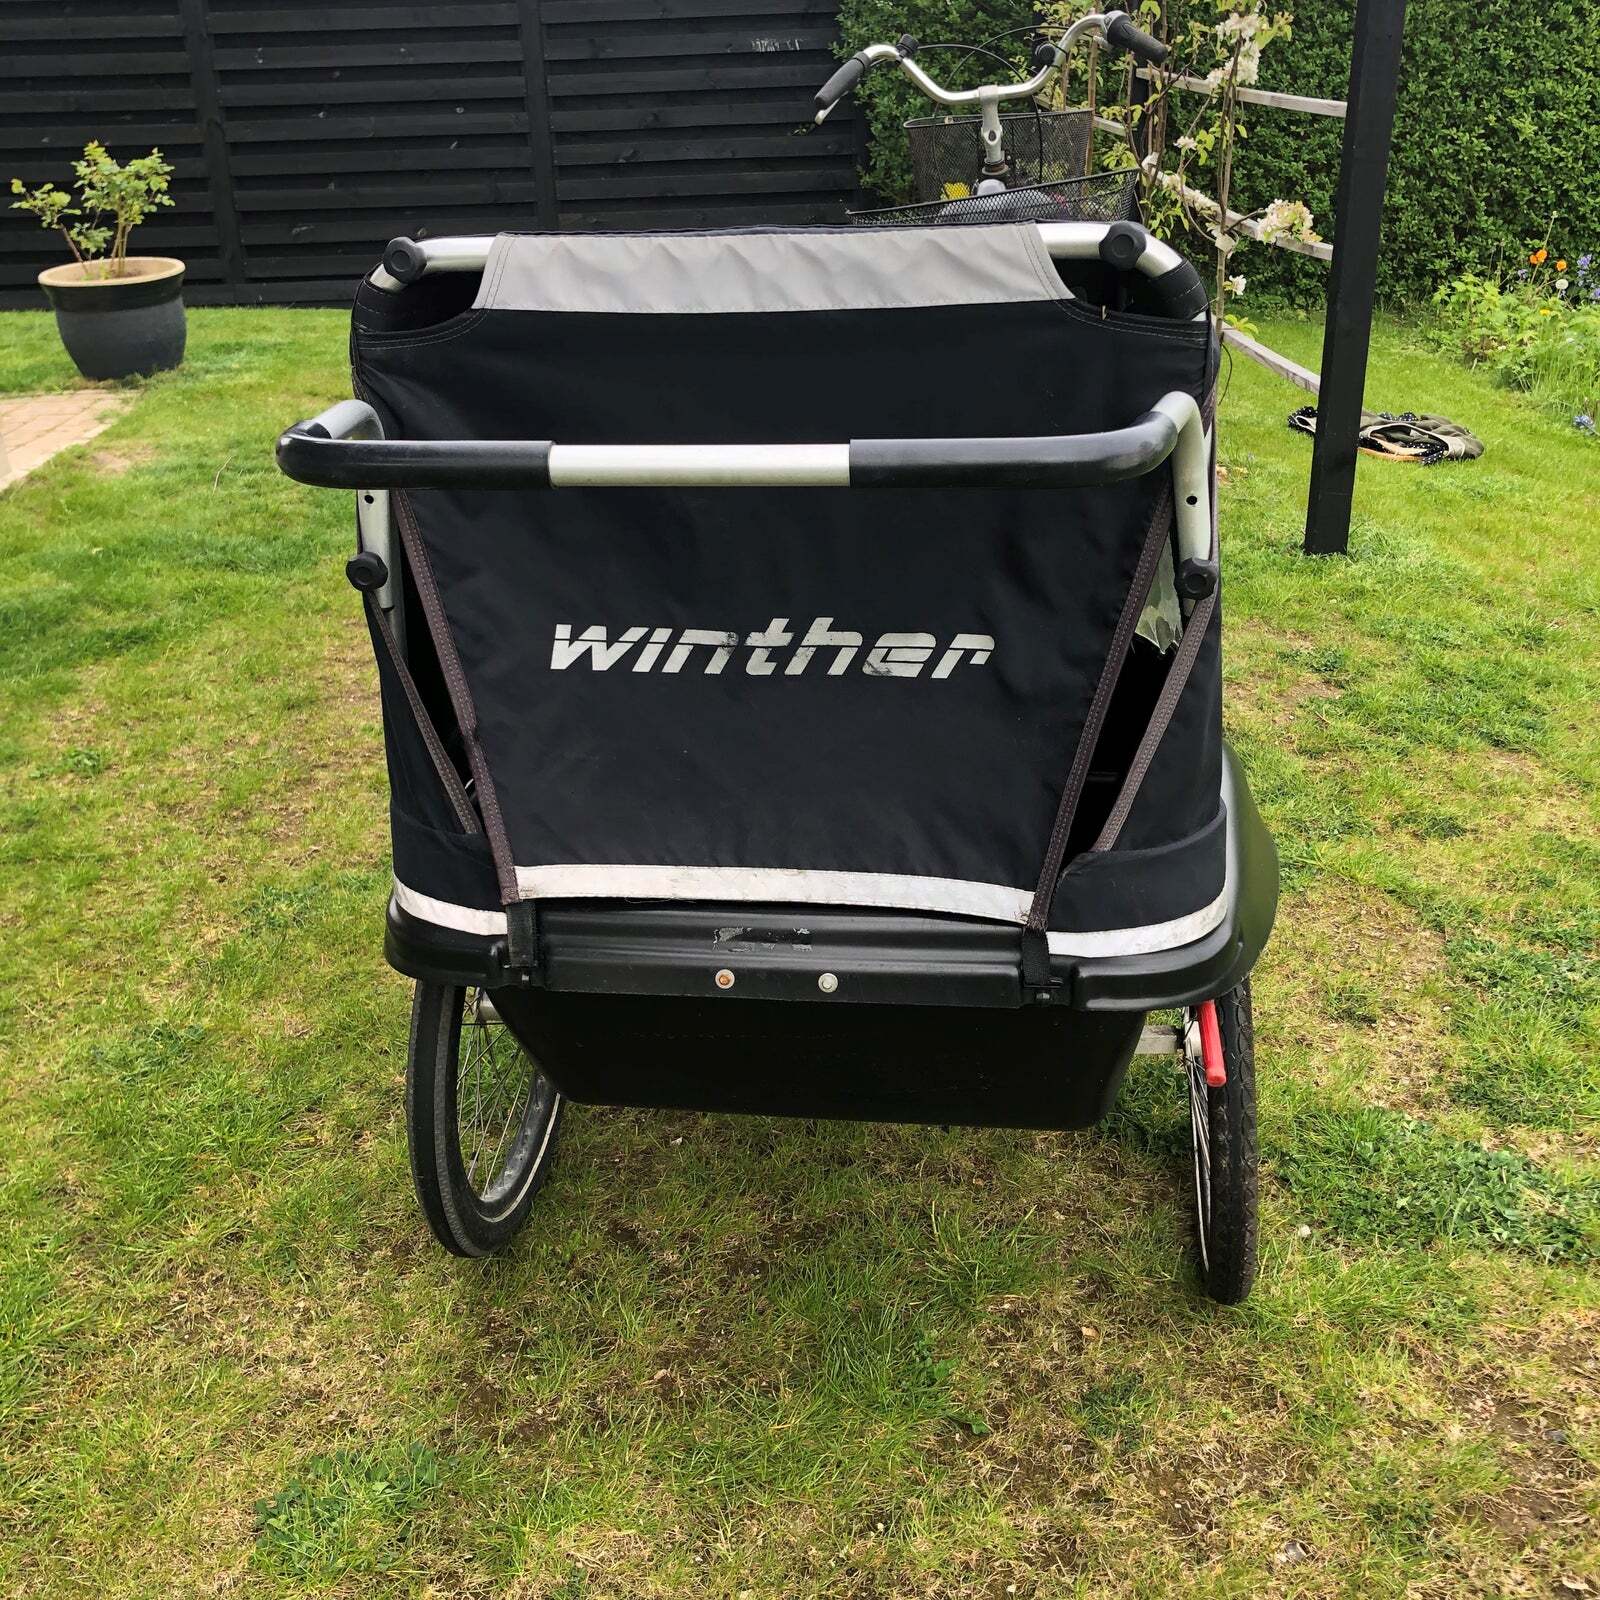 Cykeltrailer Winther dolphin XL, Winther